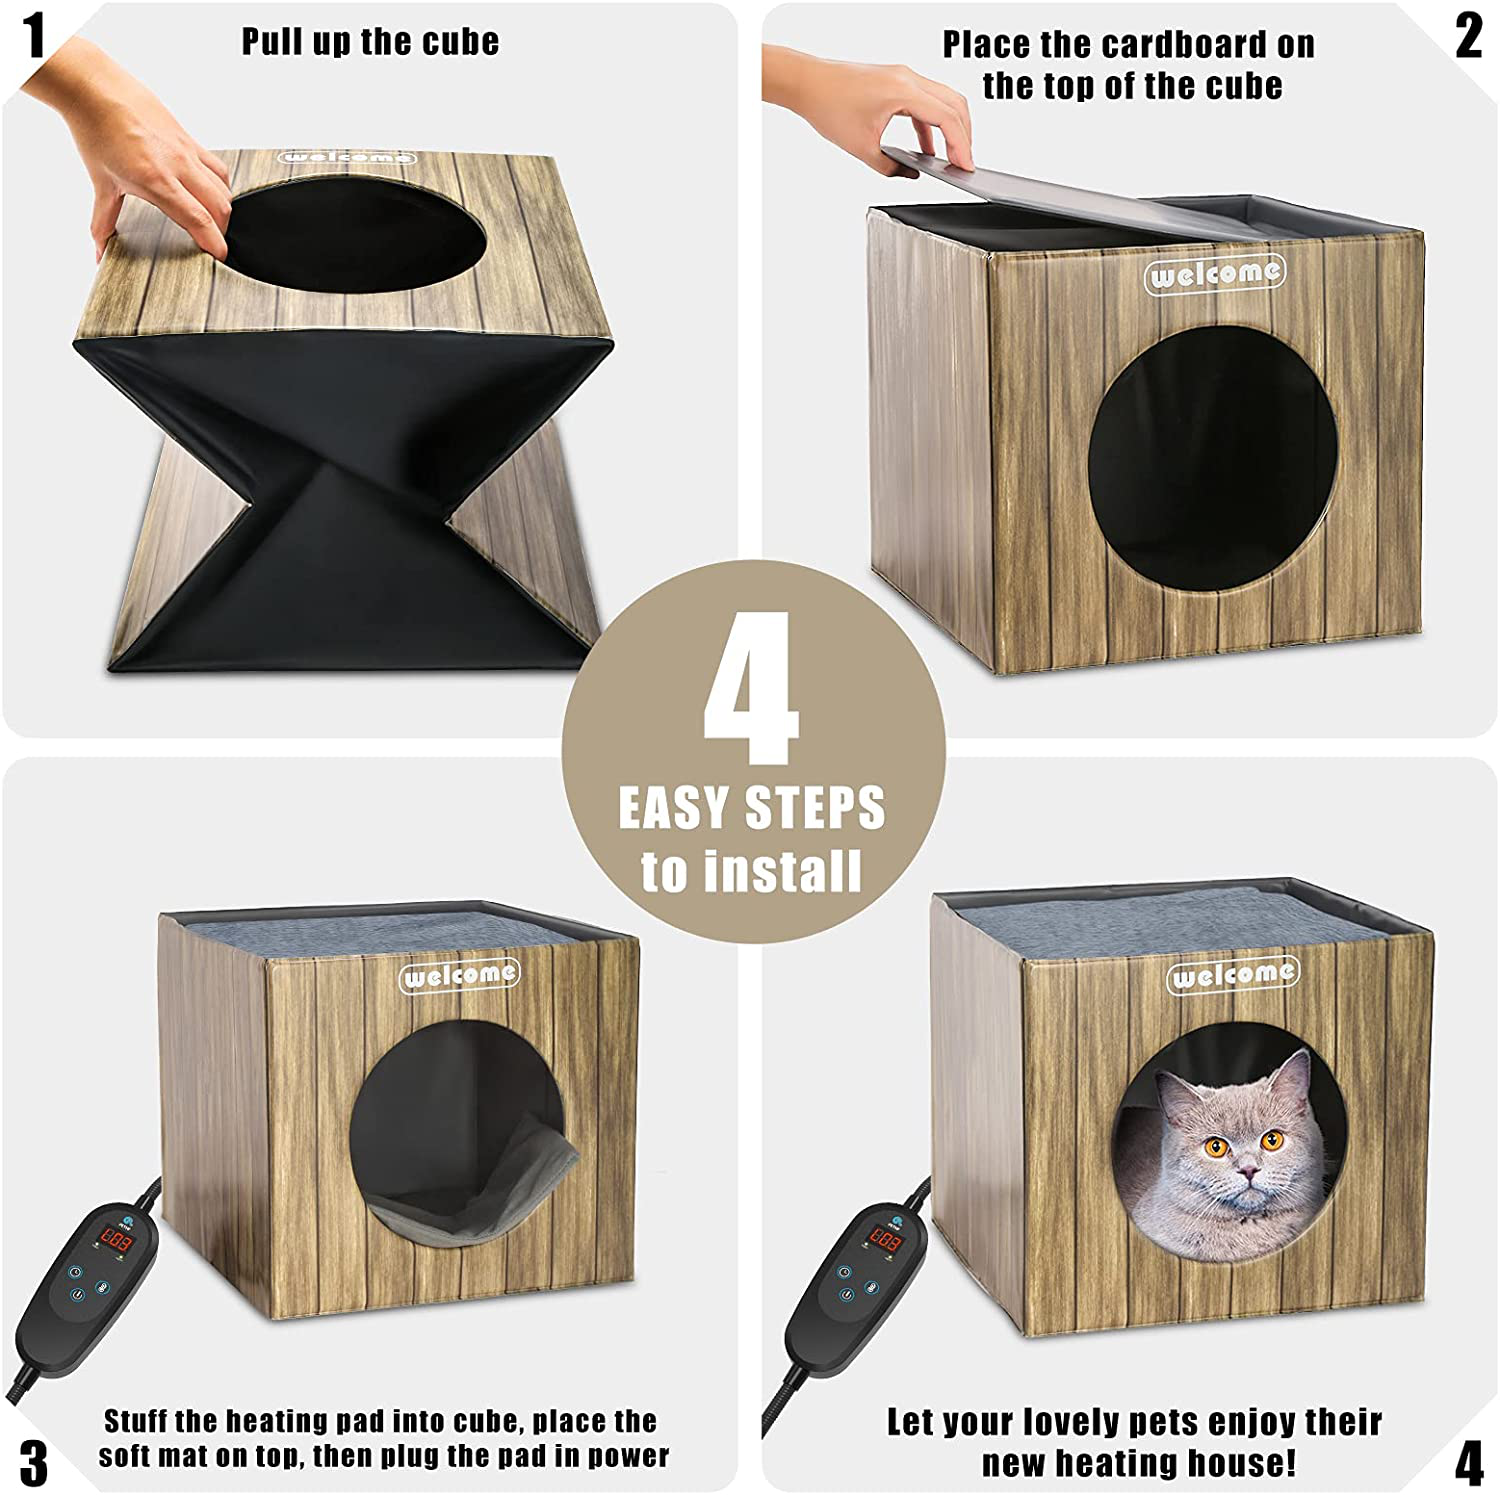 PETNF Heated Cat House, 2021 Upgraded Heating Cat Houses for Outdoor Indoor Cats and Small Dogs with Heated Mat, Foldable outside Heated Cat Bed Waterproof Kitty Shelter